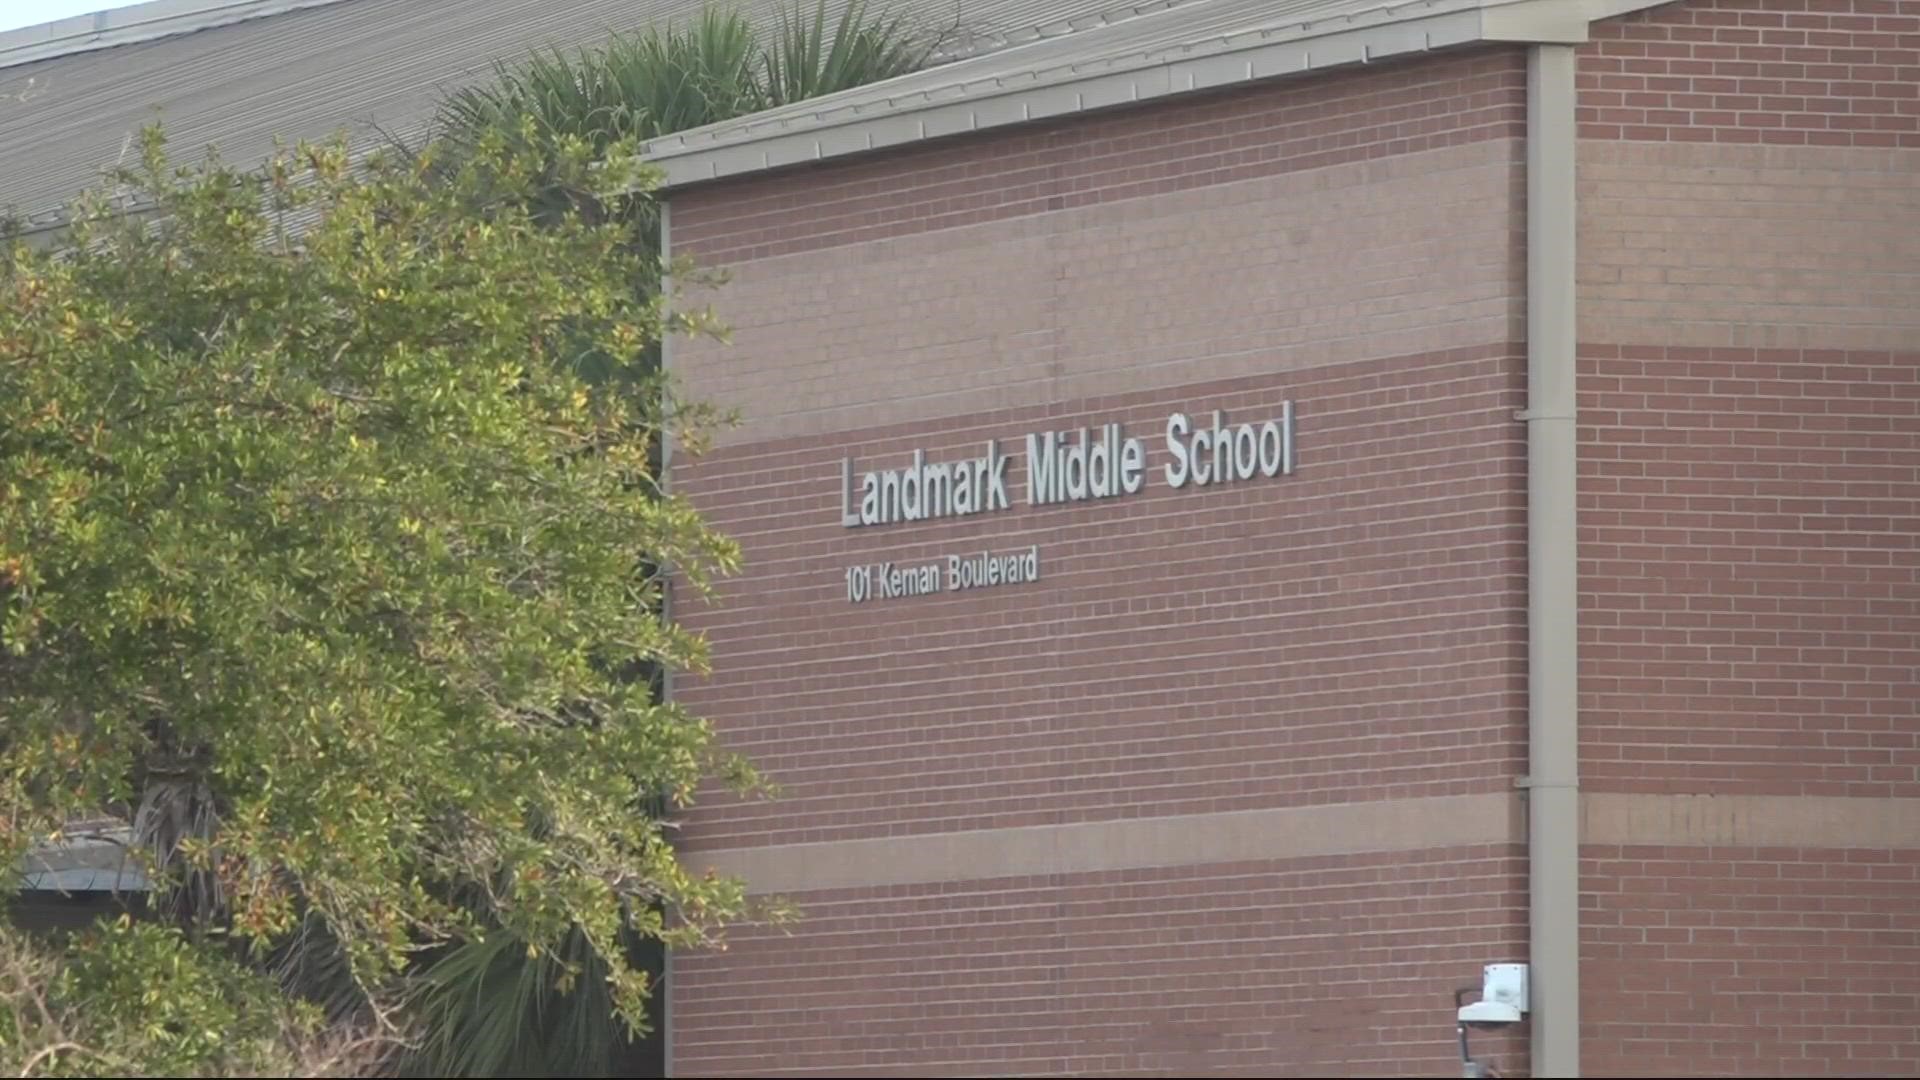 Two people are facing charges for making threats against Landmark Middle School after an investigation by the Duval County Public Schools Police Department.